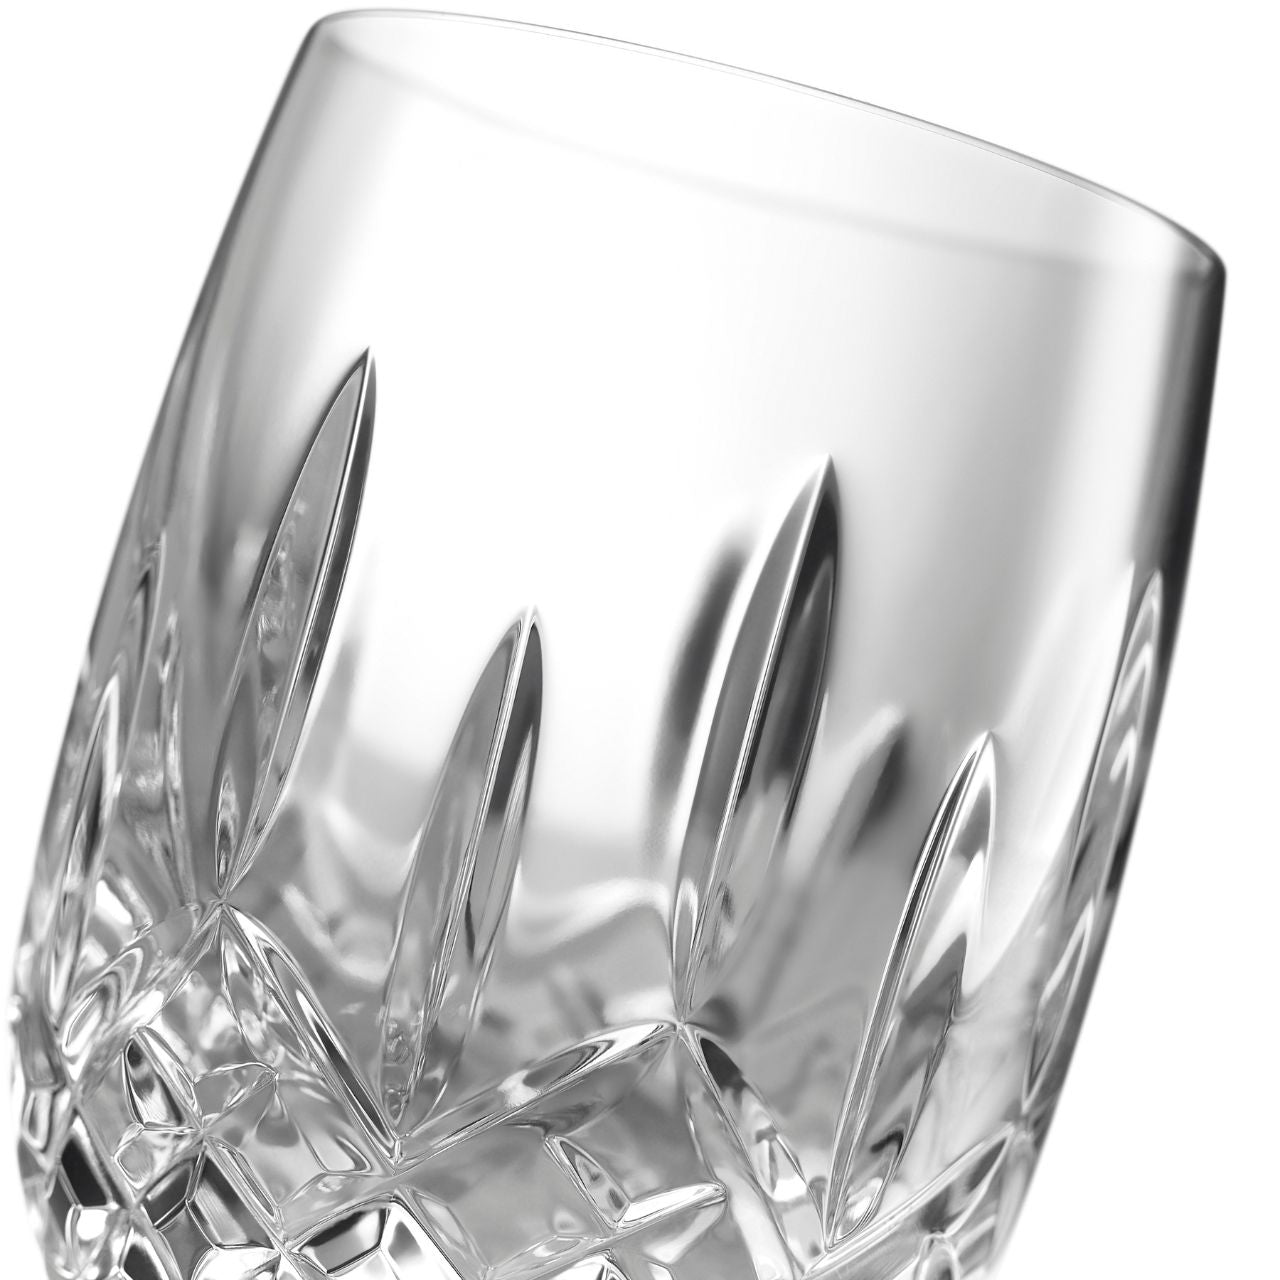 Waterford Crystal Lismore Connoisseur Rounded Tumbler  The Waterford Lismore Connoisseur Whiskey Series respects and reveres whiskeys of all varieties with a flight of hand crafted crystal tasting glasses, each one individually shaped and designed for a specific whiskey to be enjoyed straight, neat, or on the rocks. How you choose to drink your whiskey will determine the best Lismore Connoisseur glass for your particular pour.